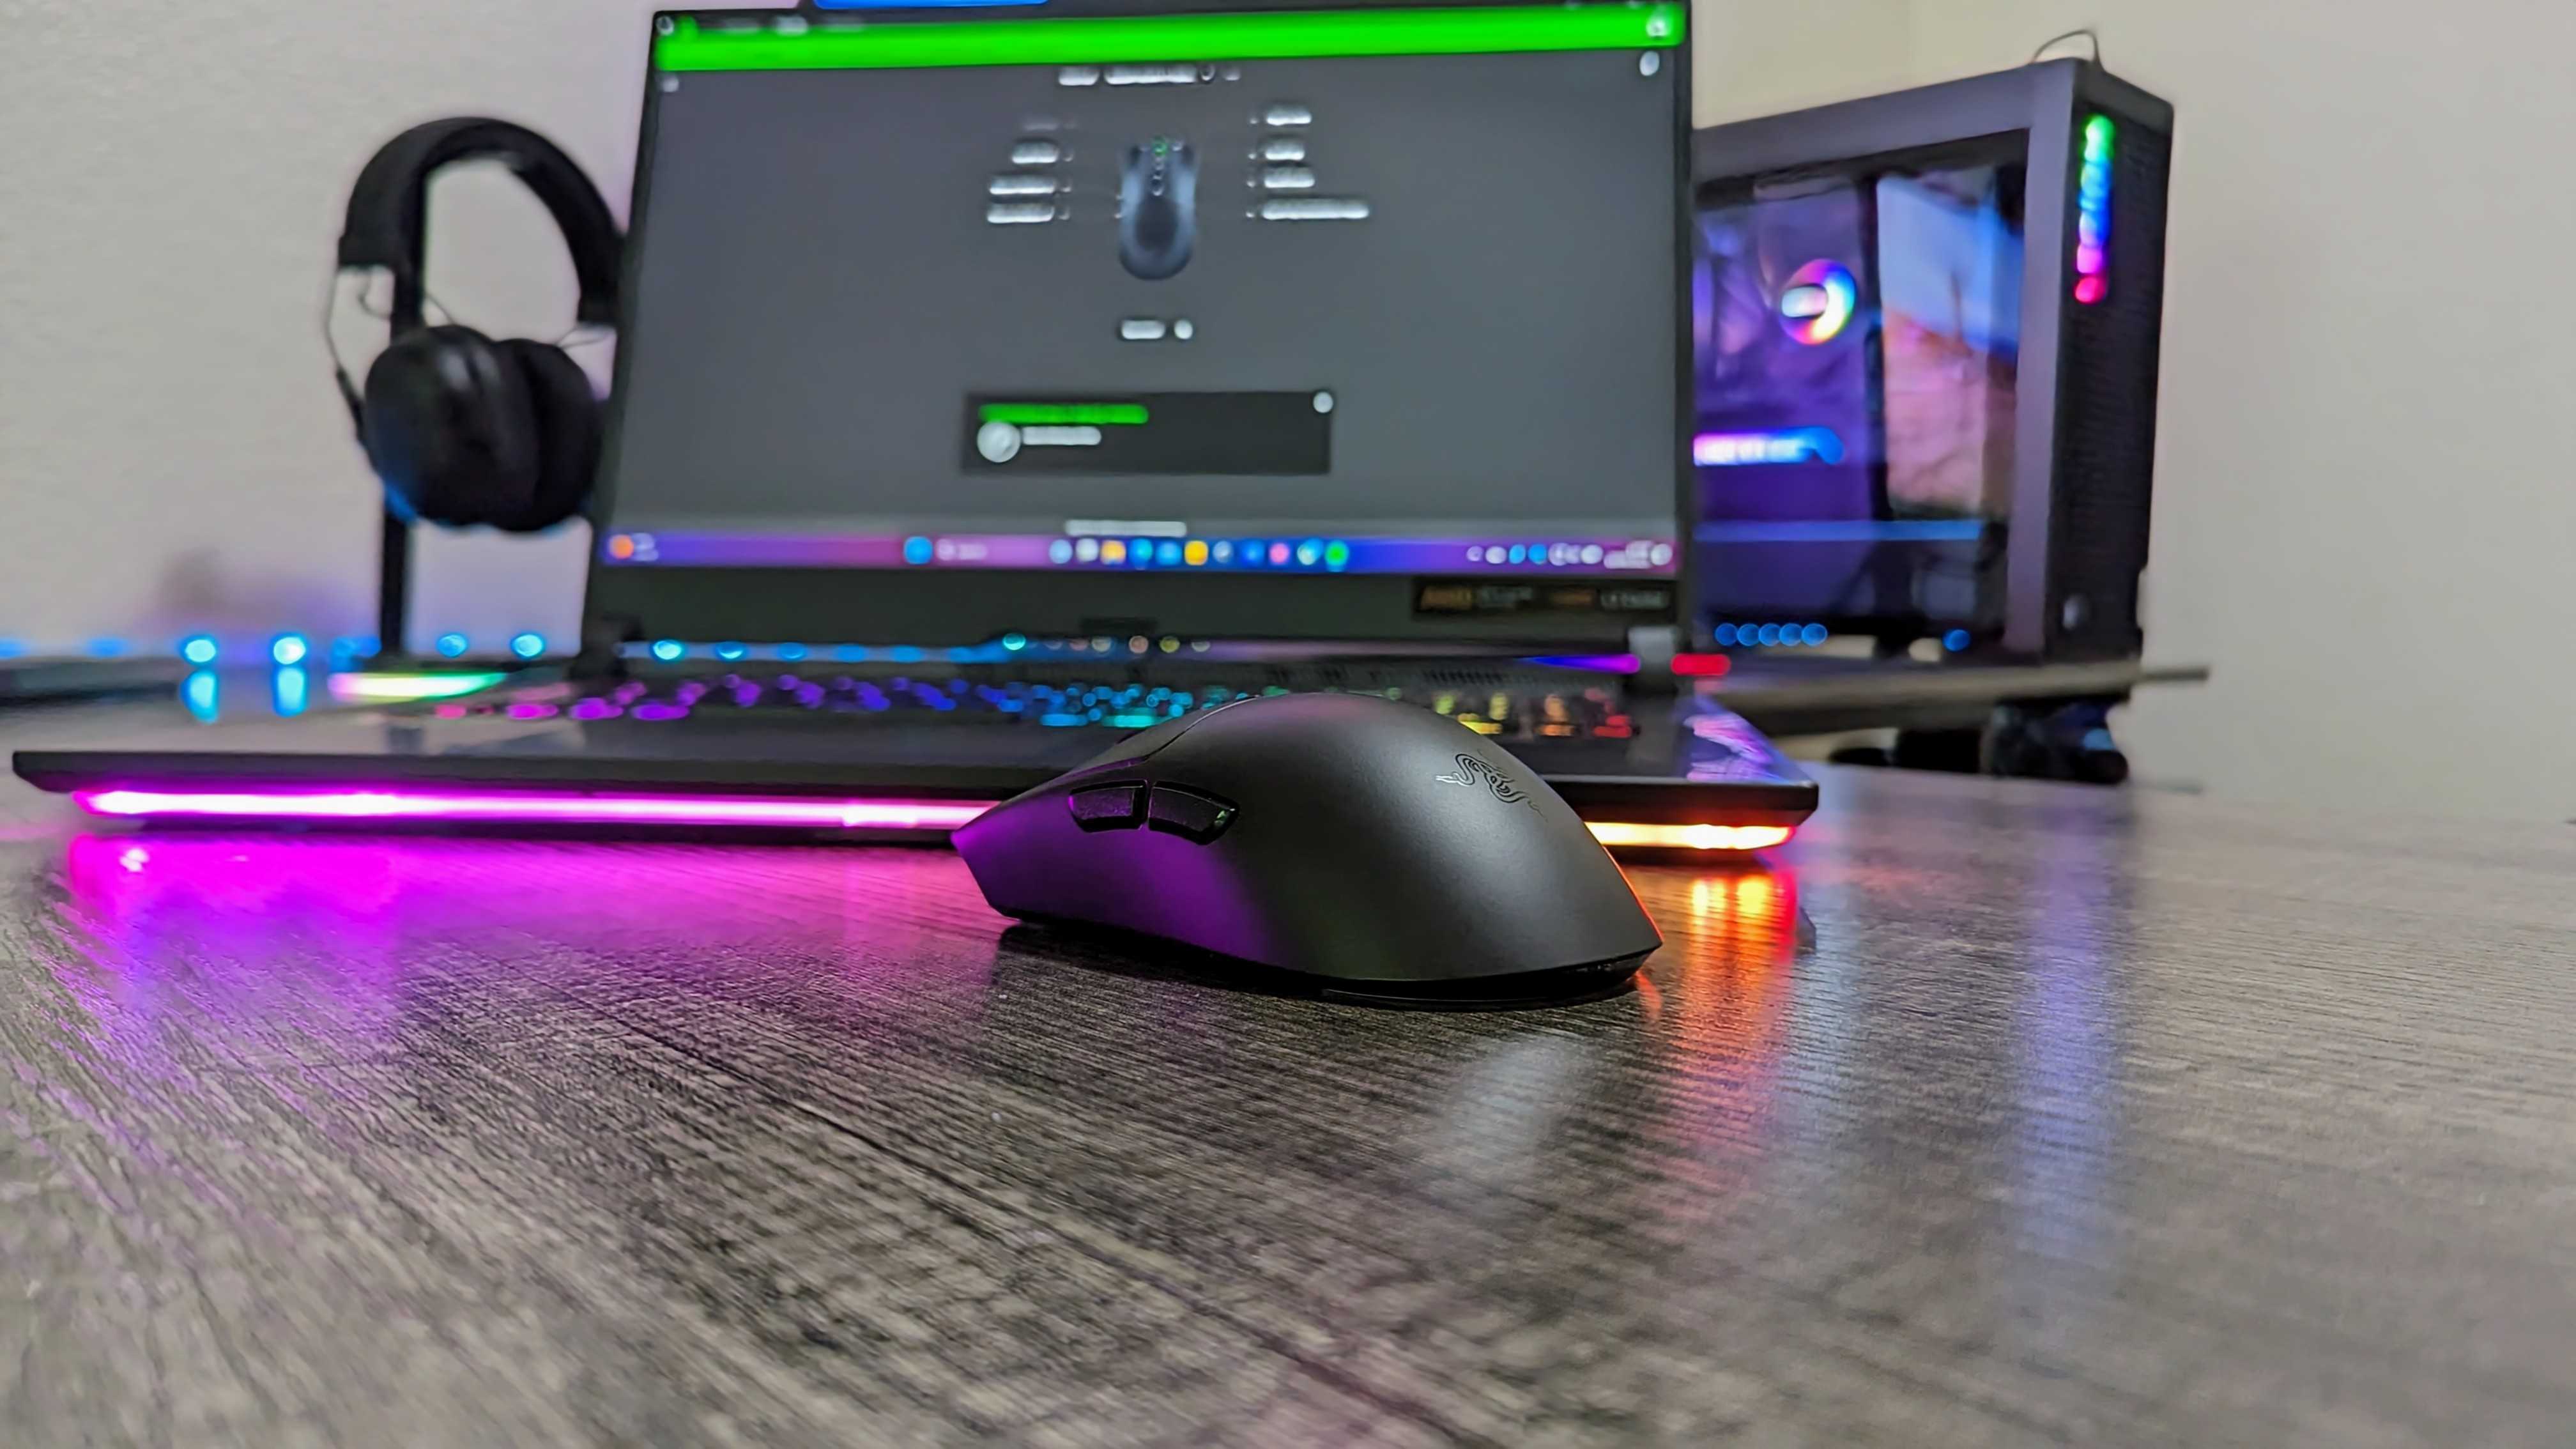 Image of the Razer Viper V3 HyperSpeed wireless gaming mouse.